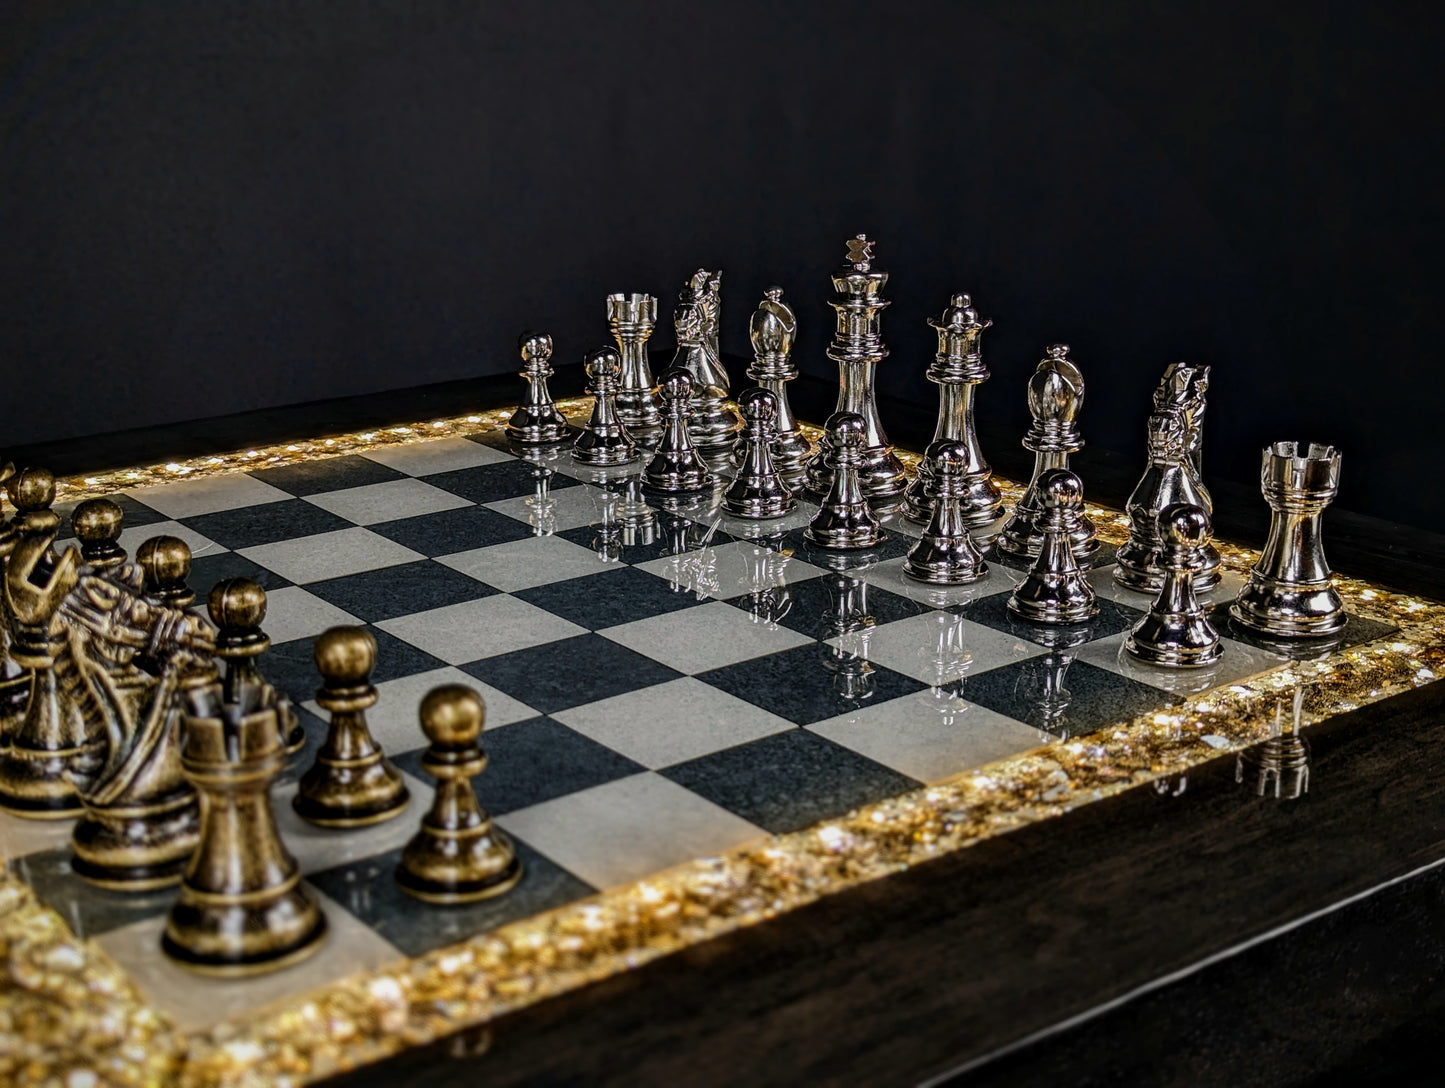 "The Rook" (Black) Chess Table